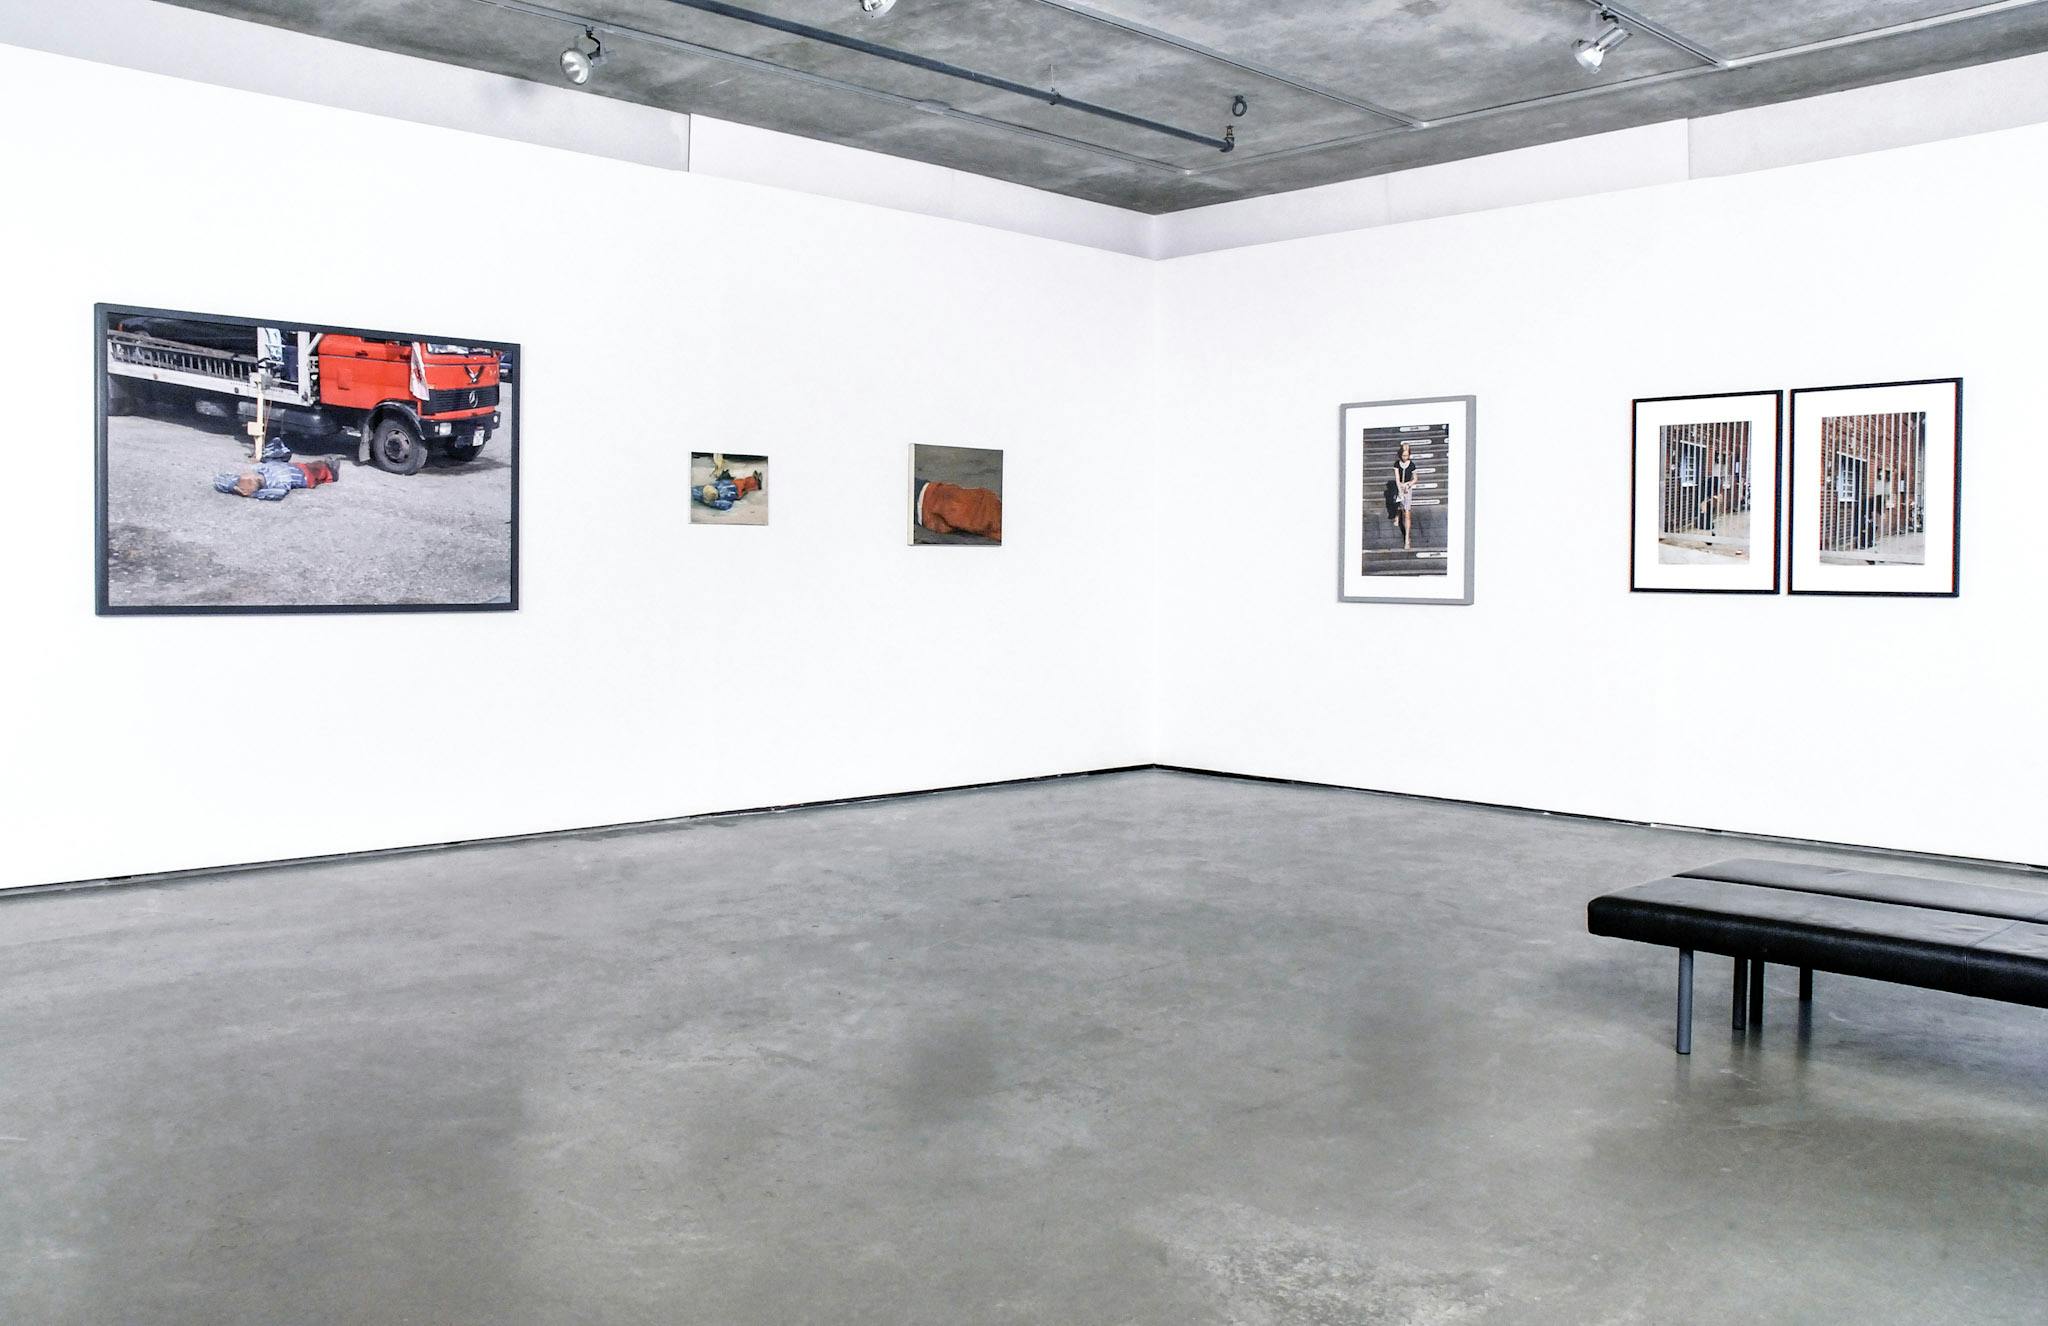 Six photographs are installed on the gallery walls. Two of them are framed photographs depicting a shutter gate. A large photograph on the left depicts a mannequin beside a fire truck. 